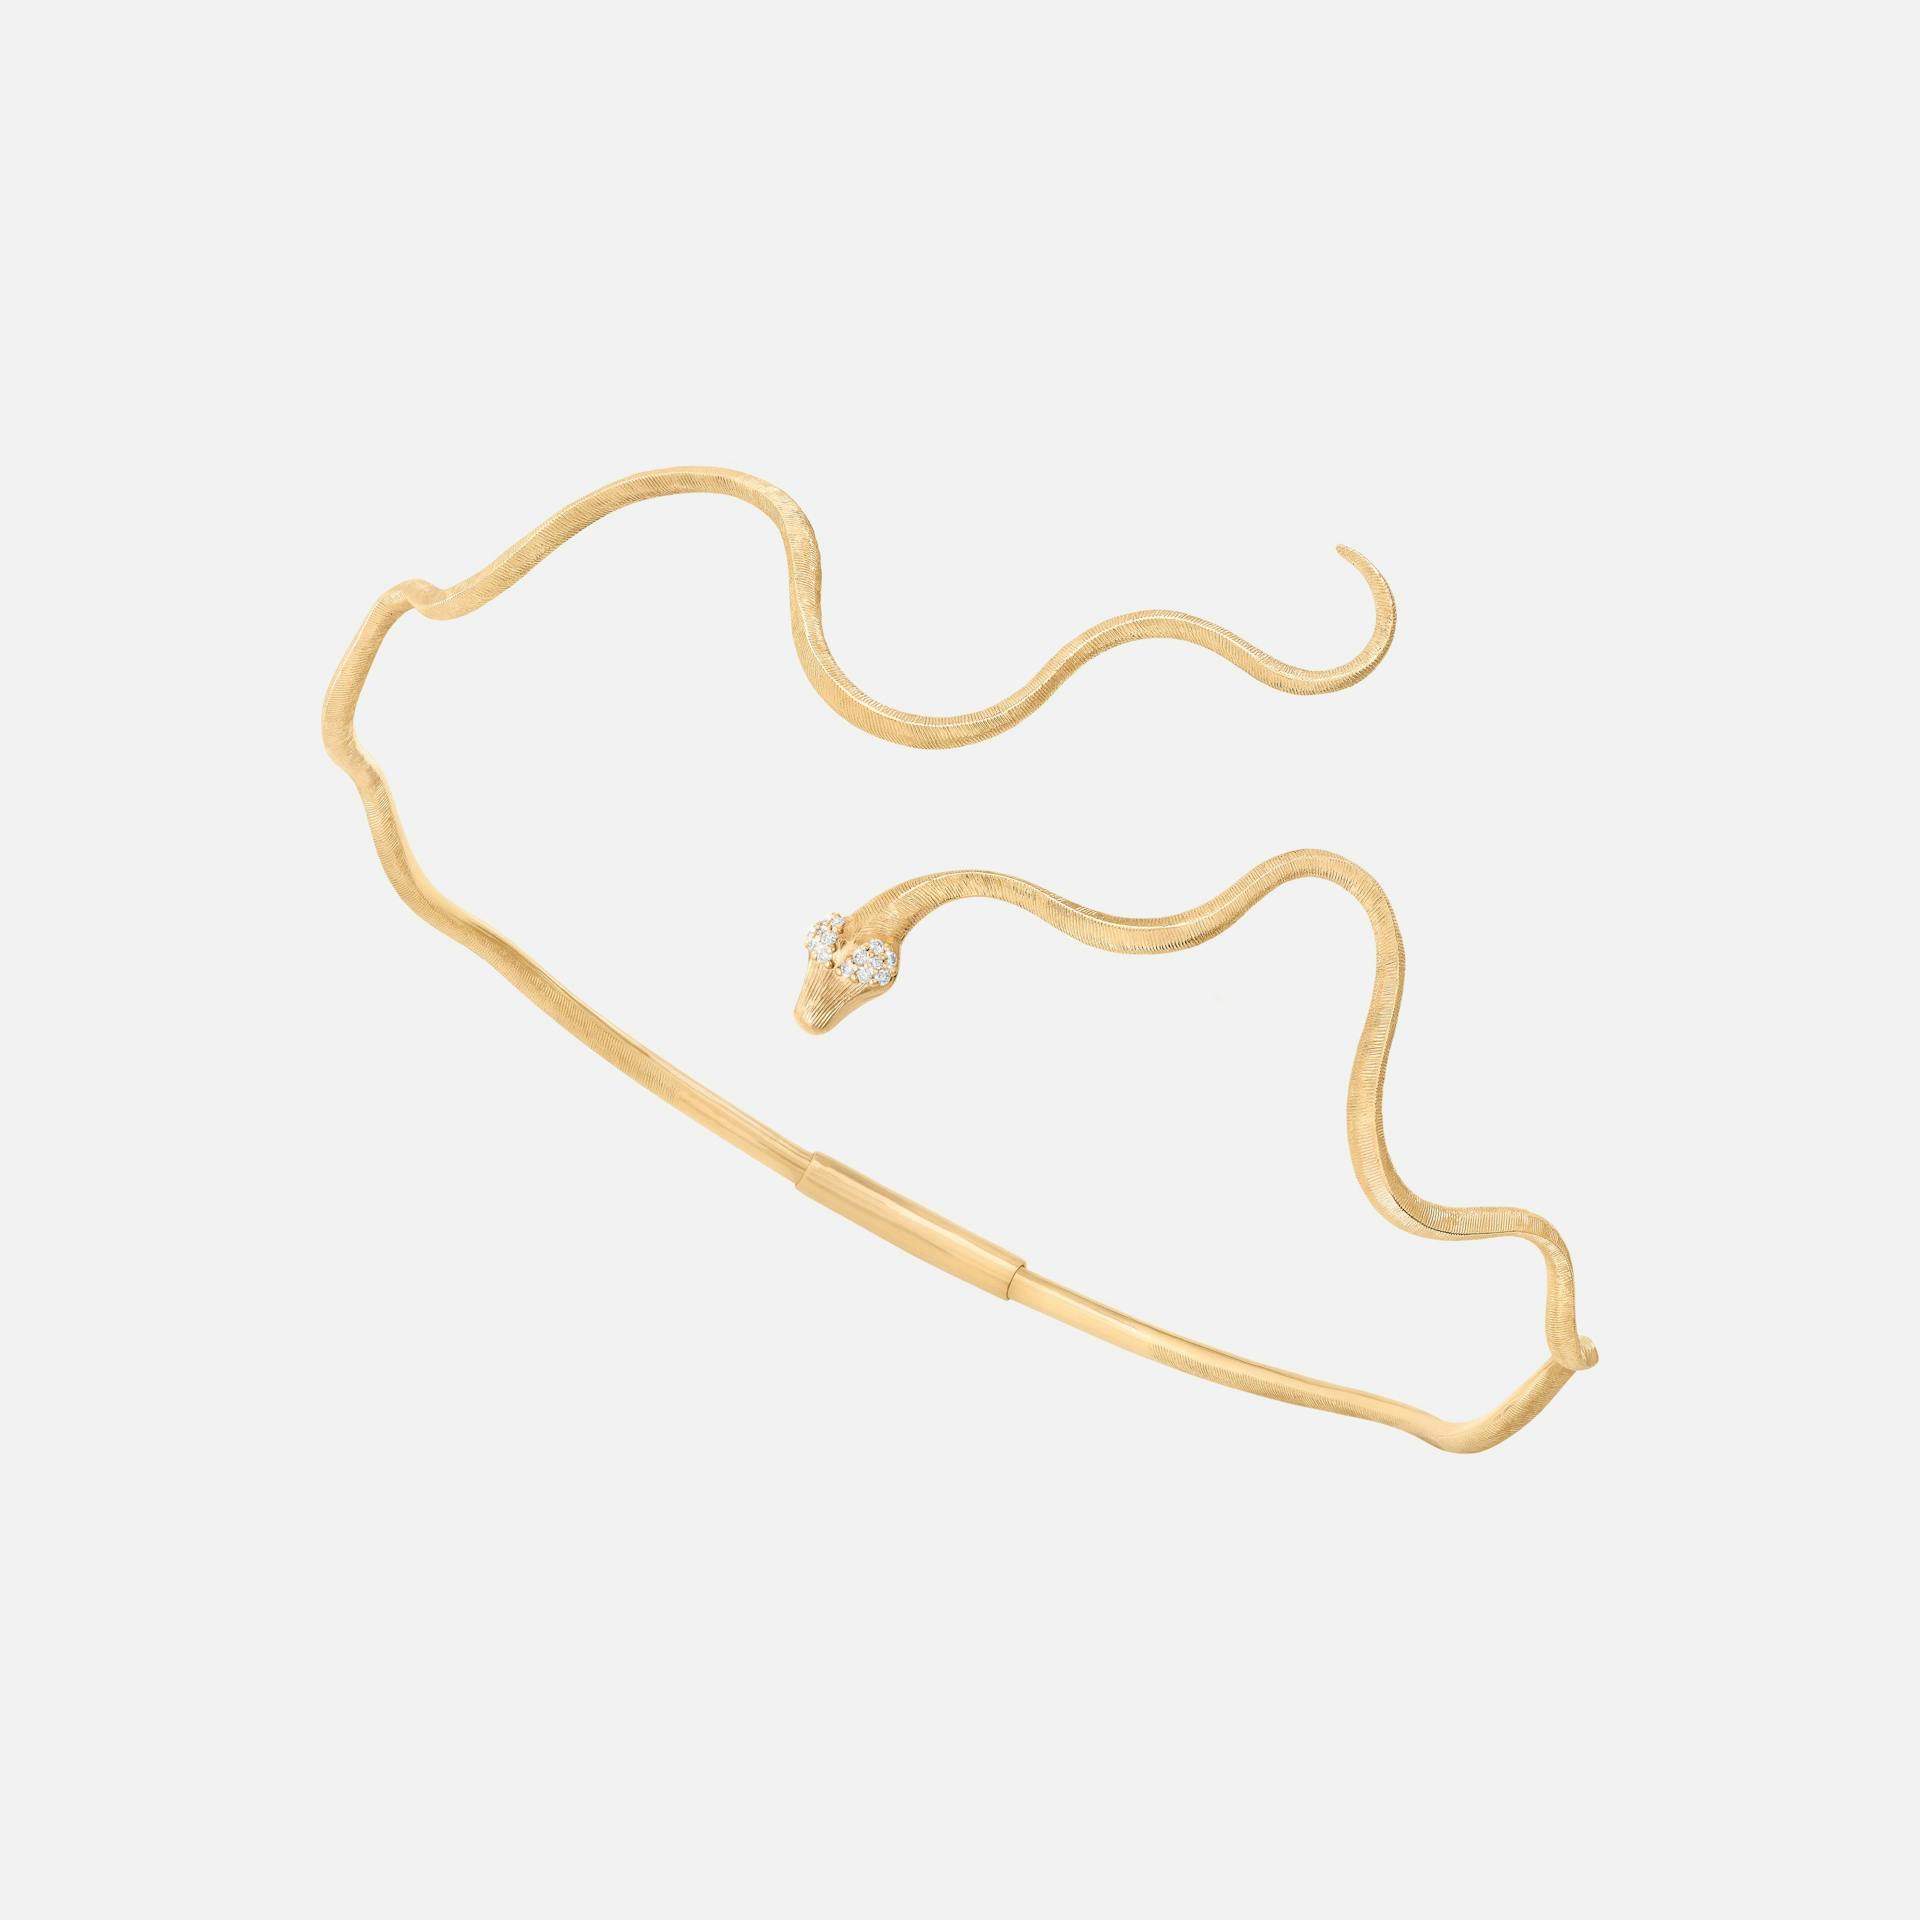 Snakes 31 cm Neck Bangle in Yellow Gold with Diamonds  |  Ole Lynggaard Copenhagen 